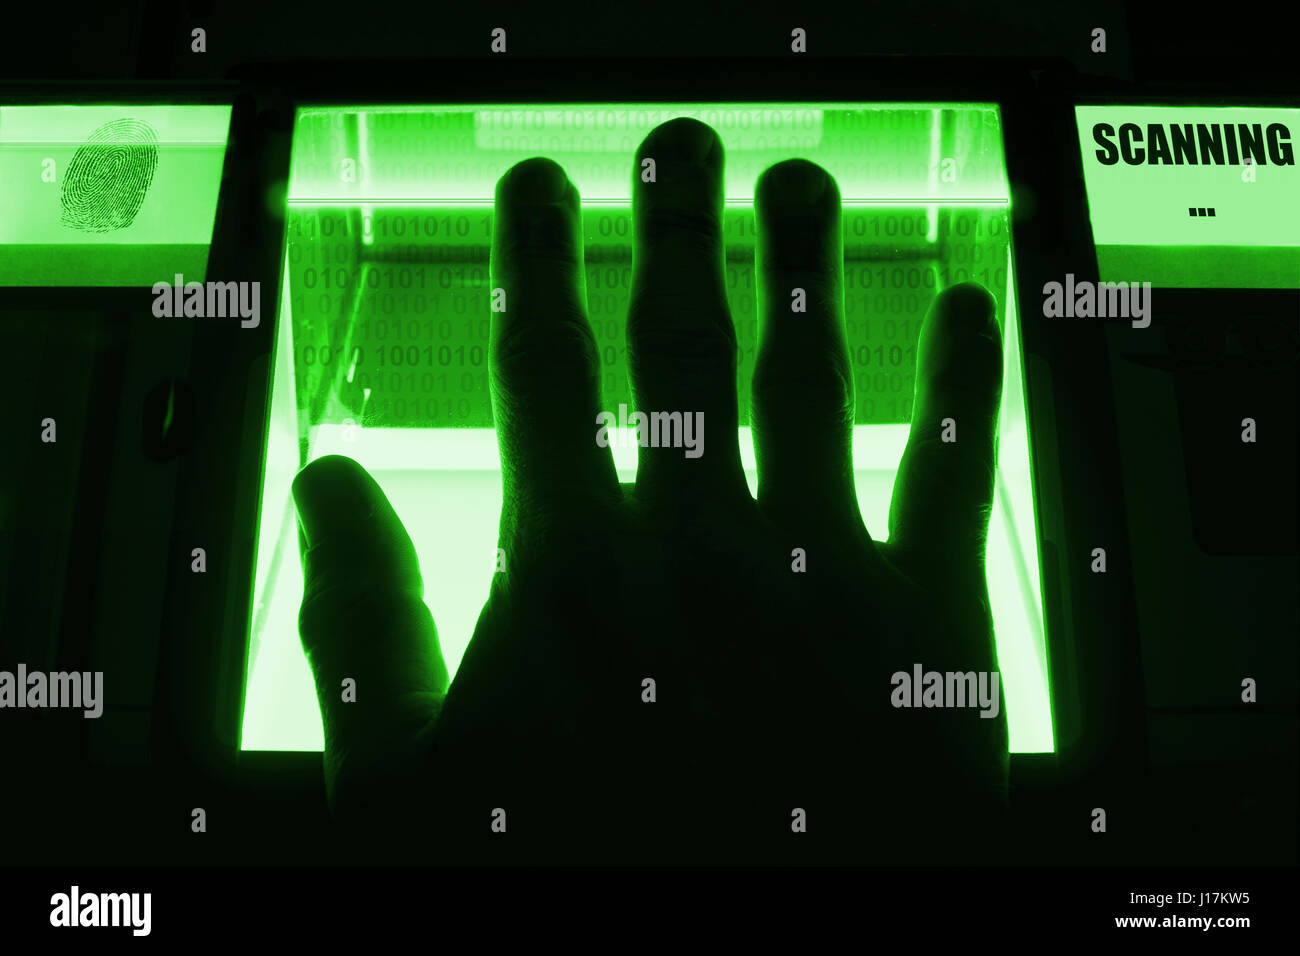 A person uses a fingerprint scanner. Can be used for biometrics or cybersecurity concepts. Stock Photo